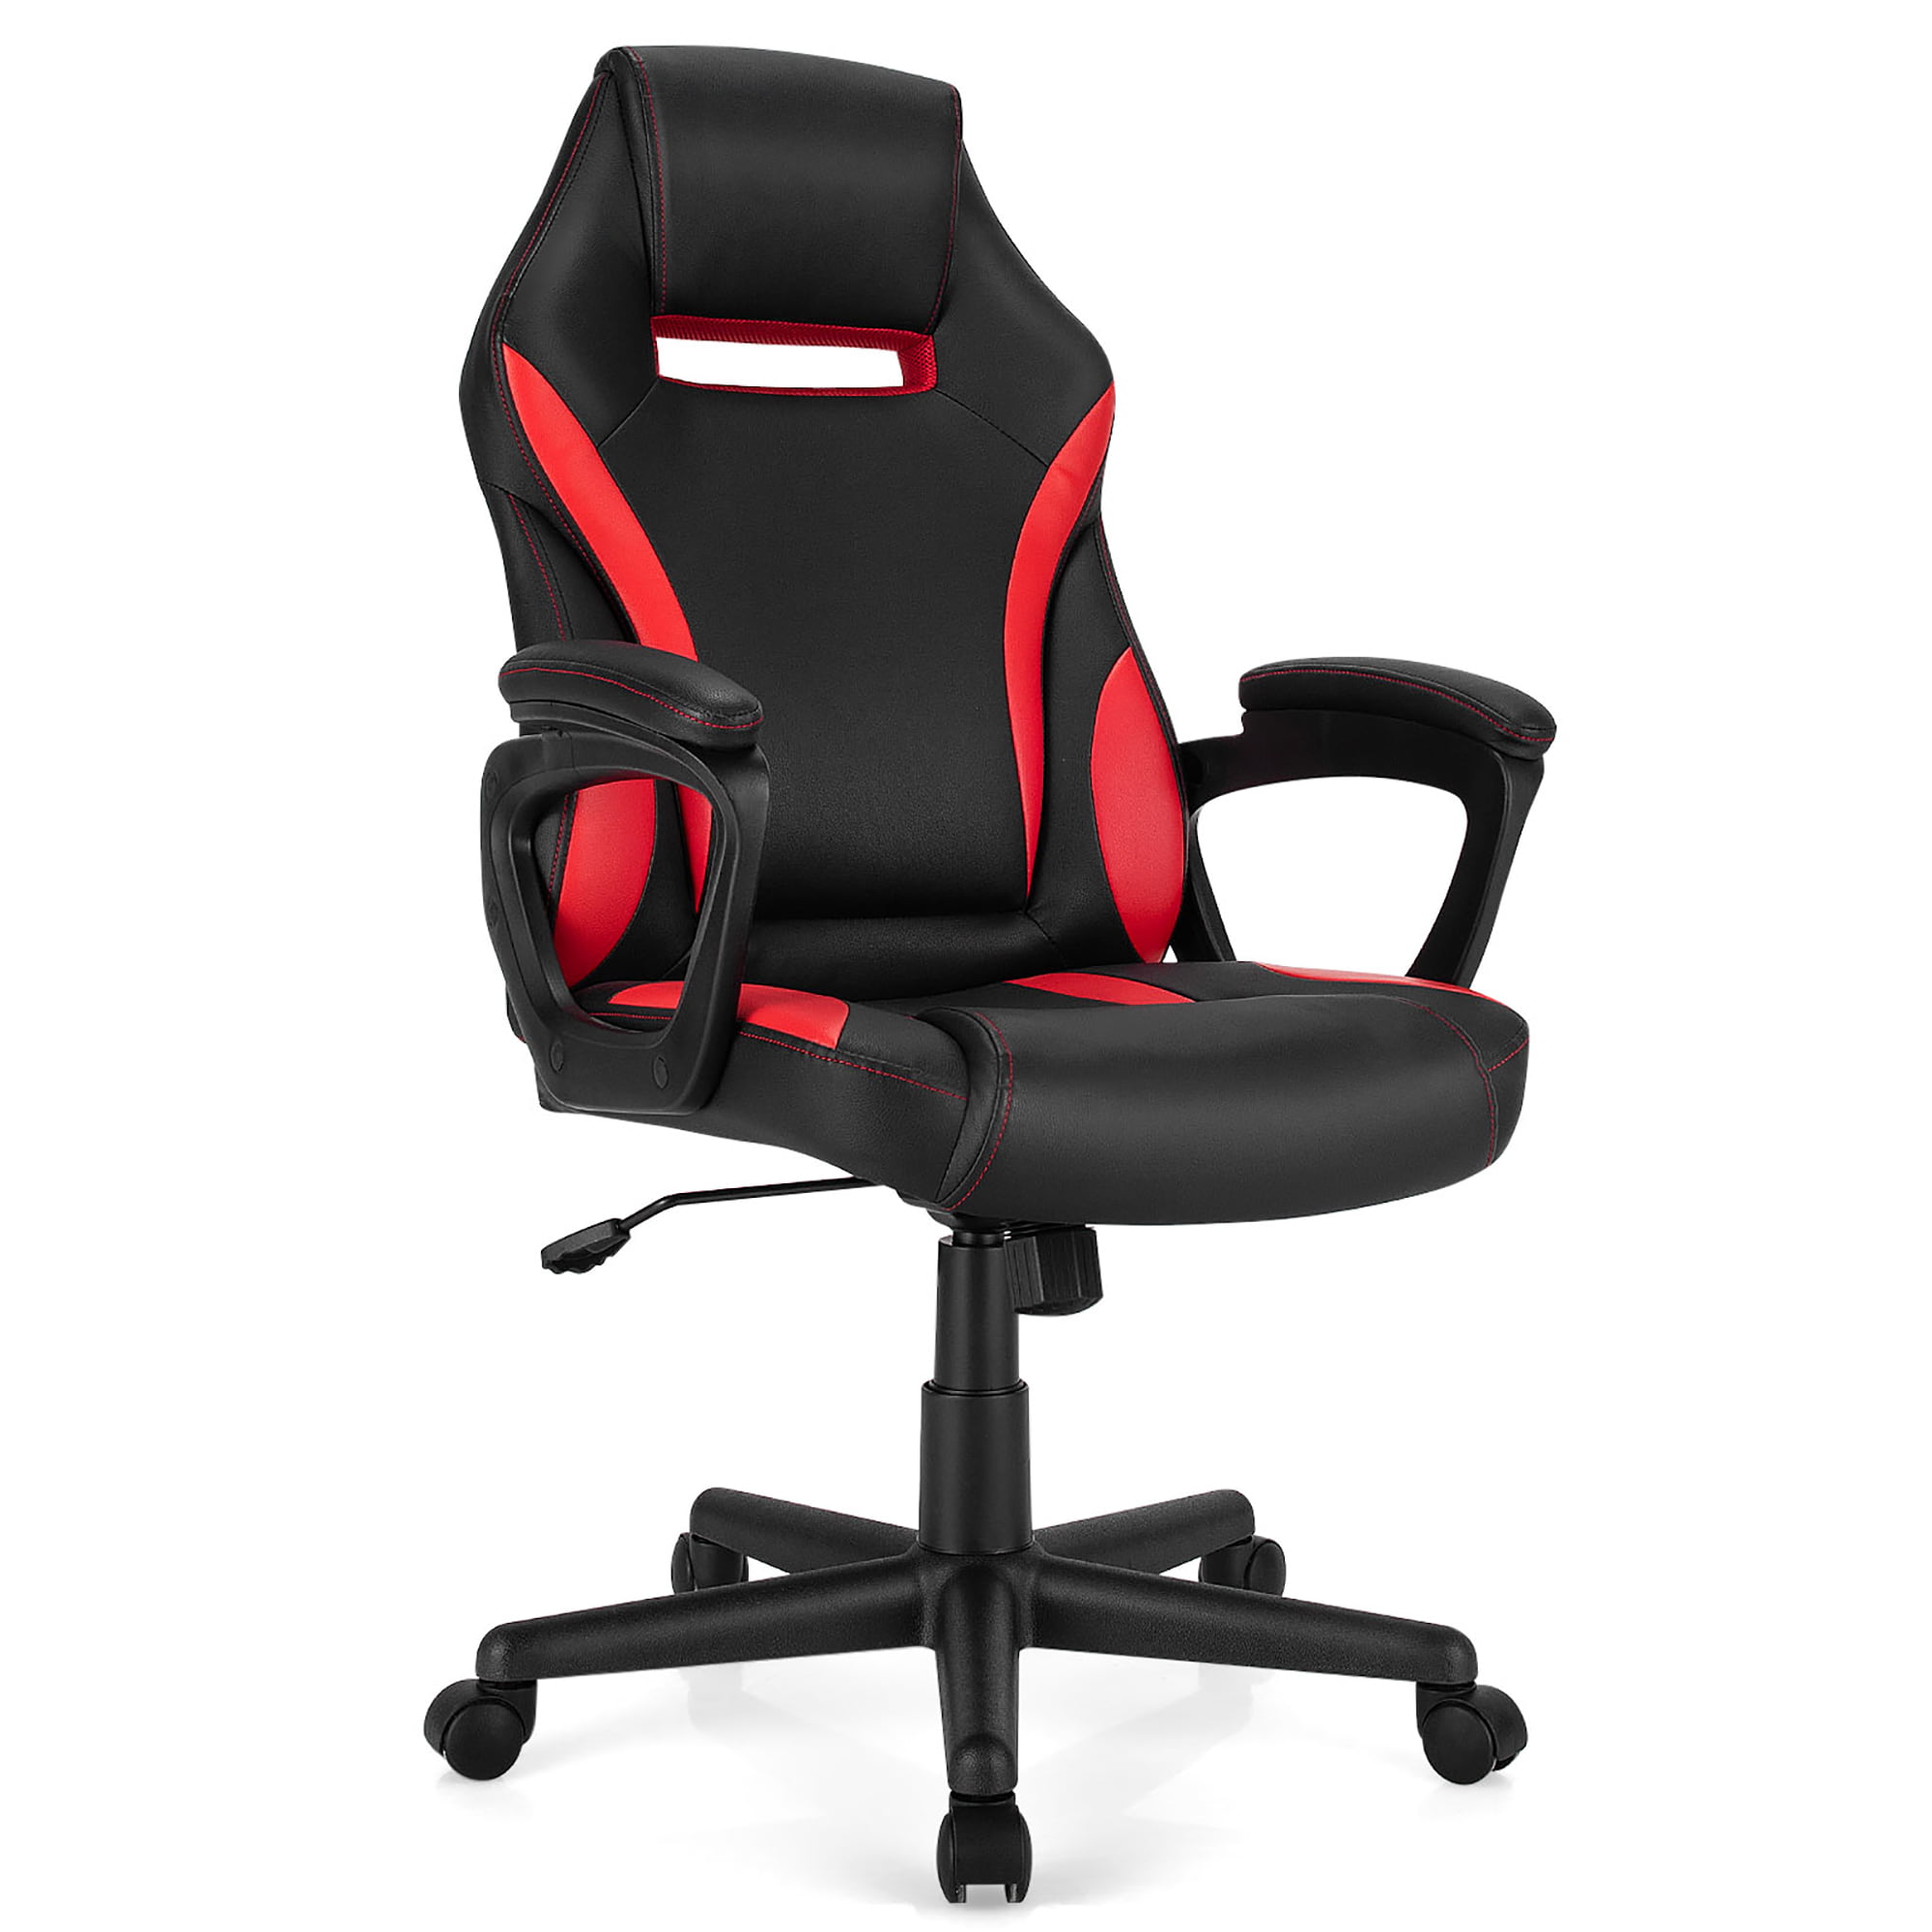 PC Gaming Chair Swivel High Back Ergonomic Leather RC Adjustable Office Red New